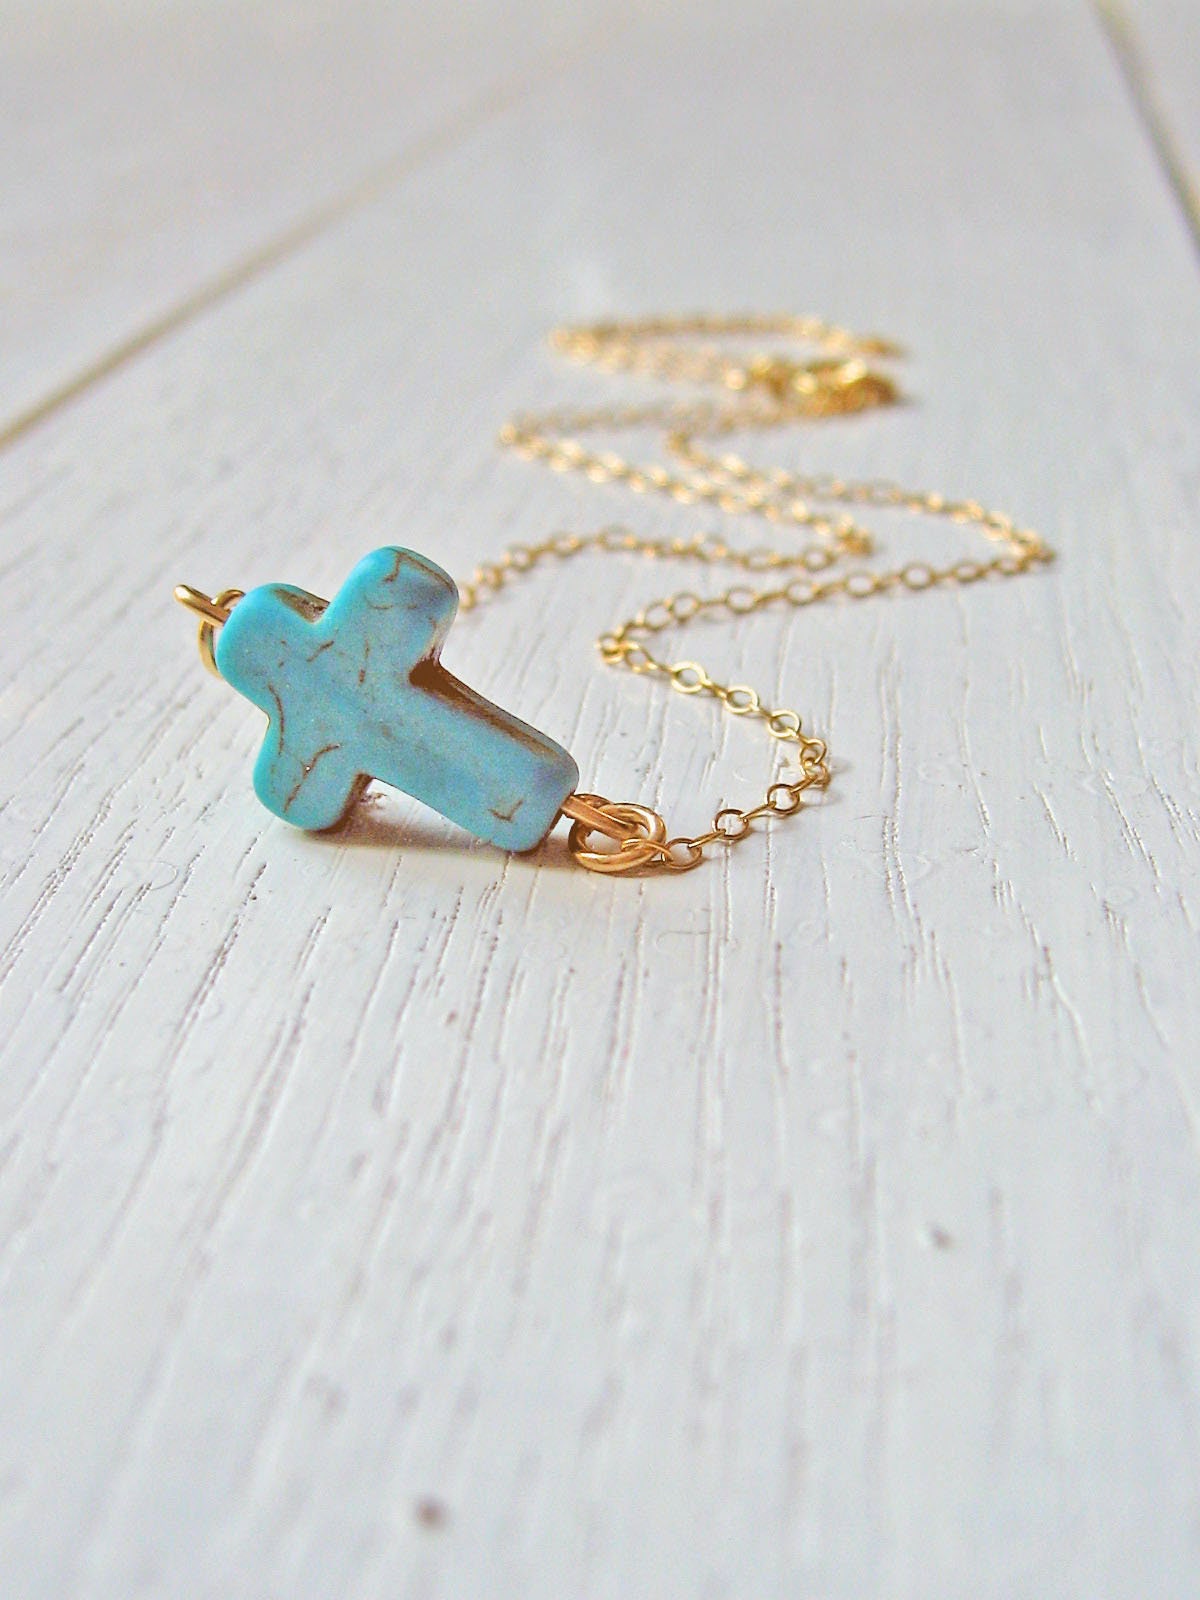 Baby Turquoise Cross Necklace 14k Gold Fill or Sterling - Etsy